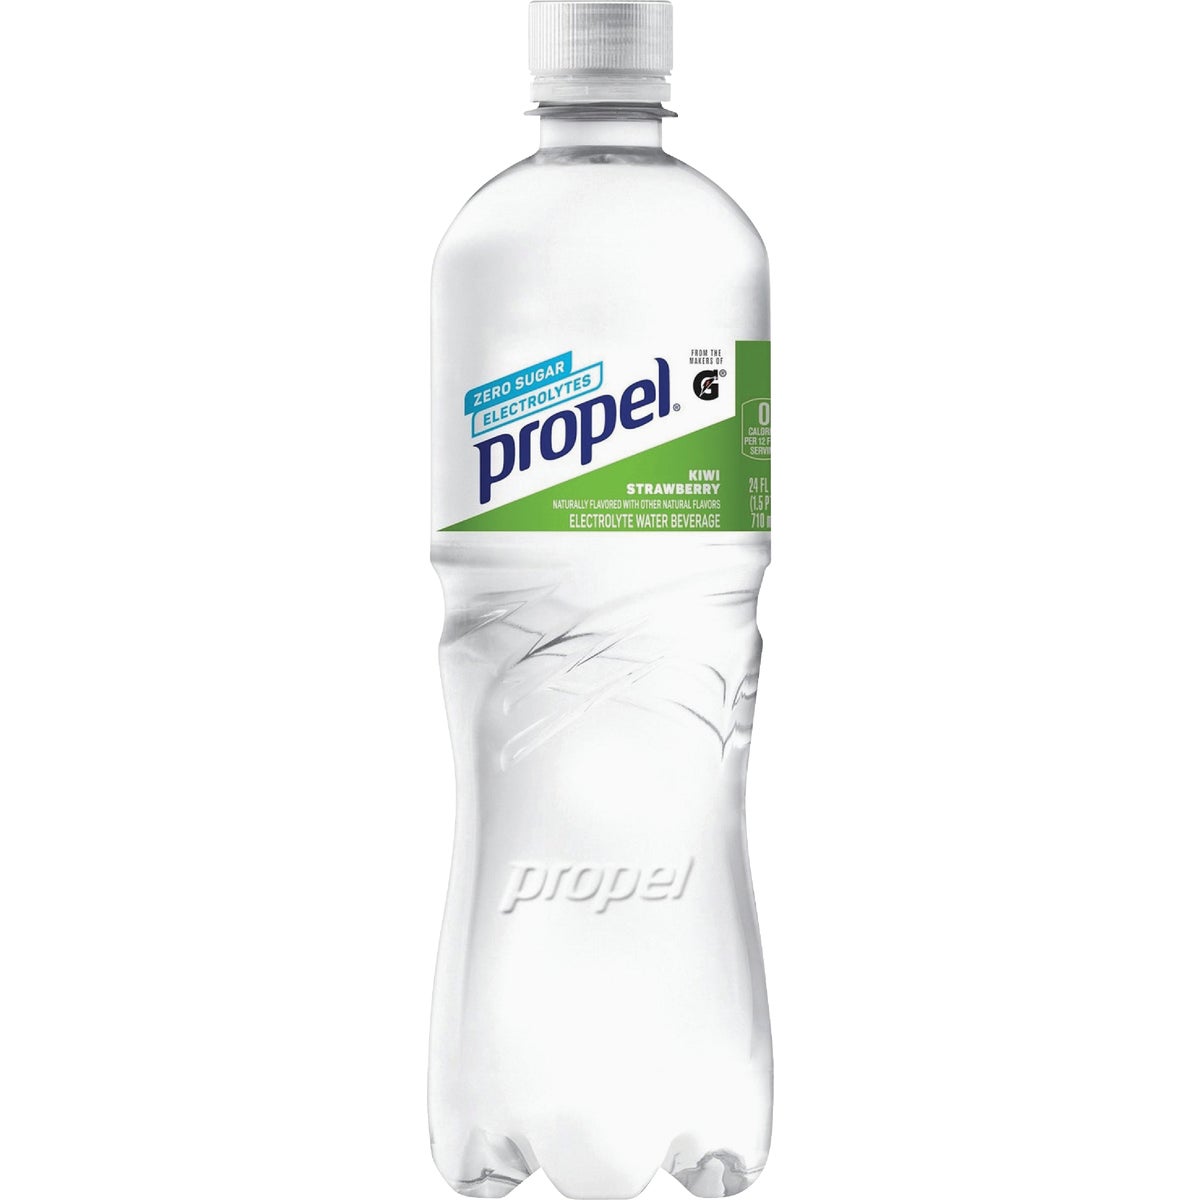 Propel 24 Oz. Kiwi Strawberry Flavored Water (12-Pack)